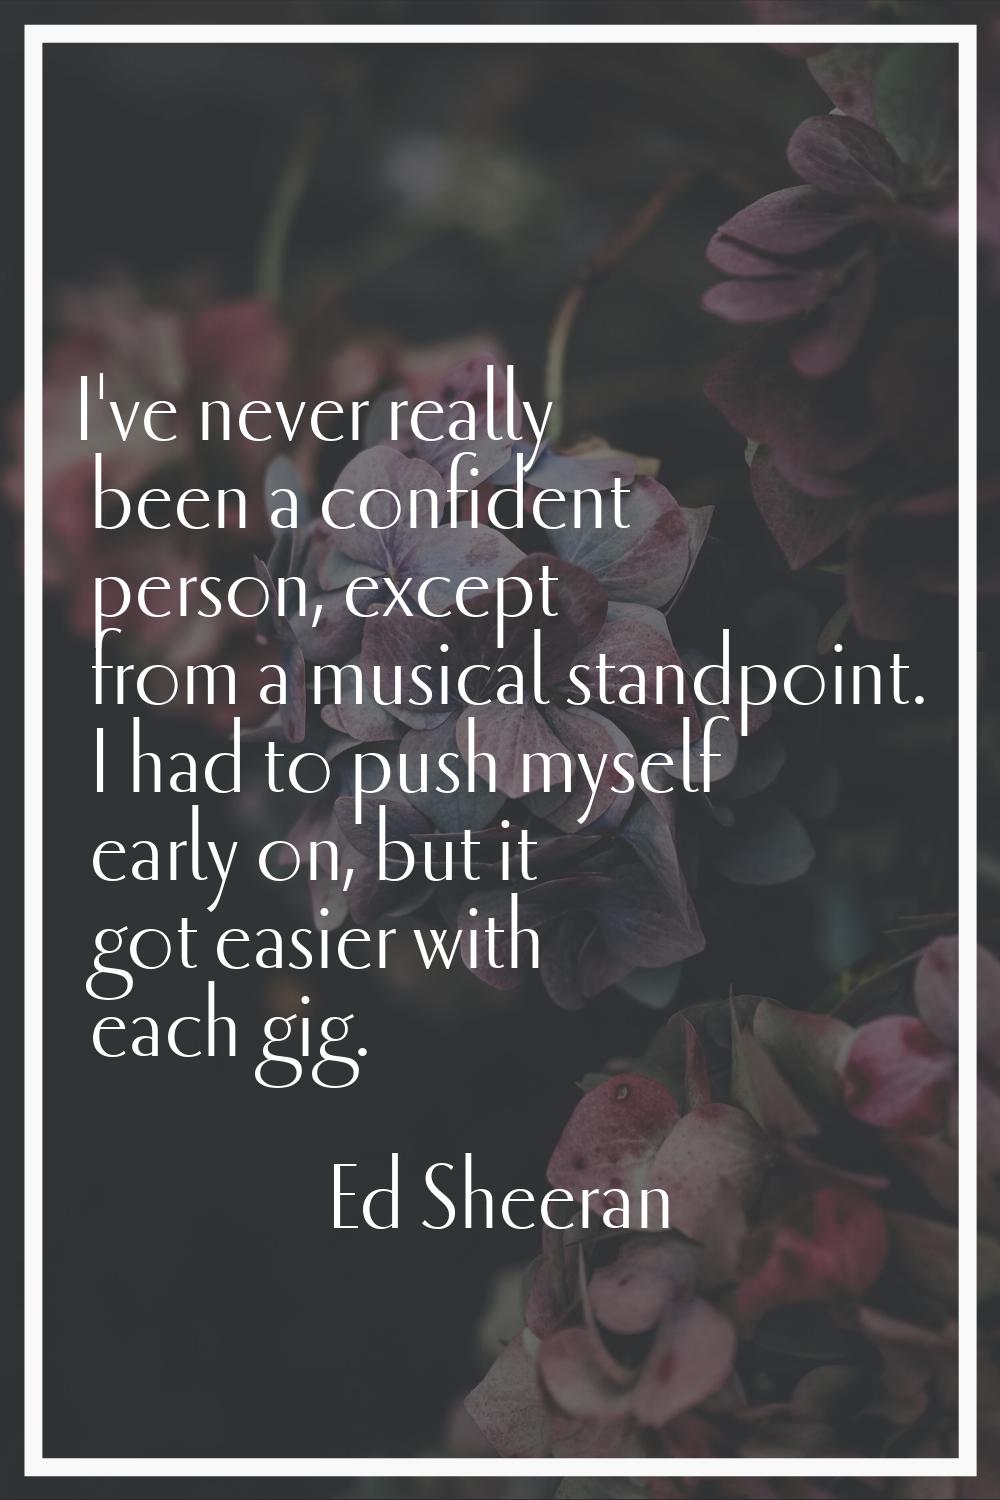 I've never really been a confident person, except from a musical standpoint. I had to push myself e